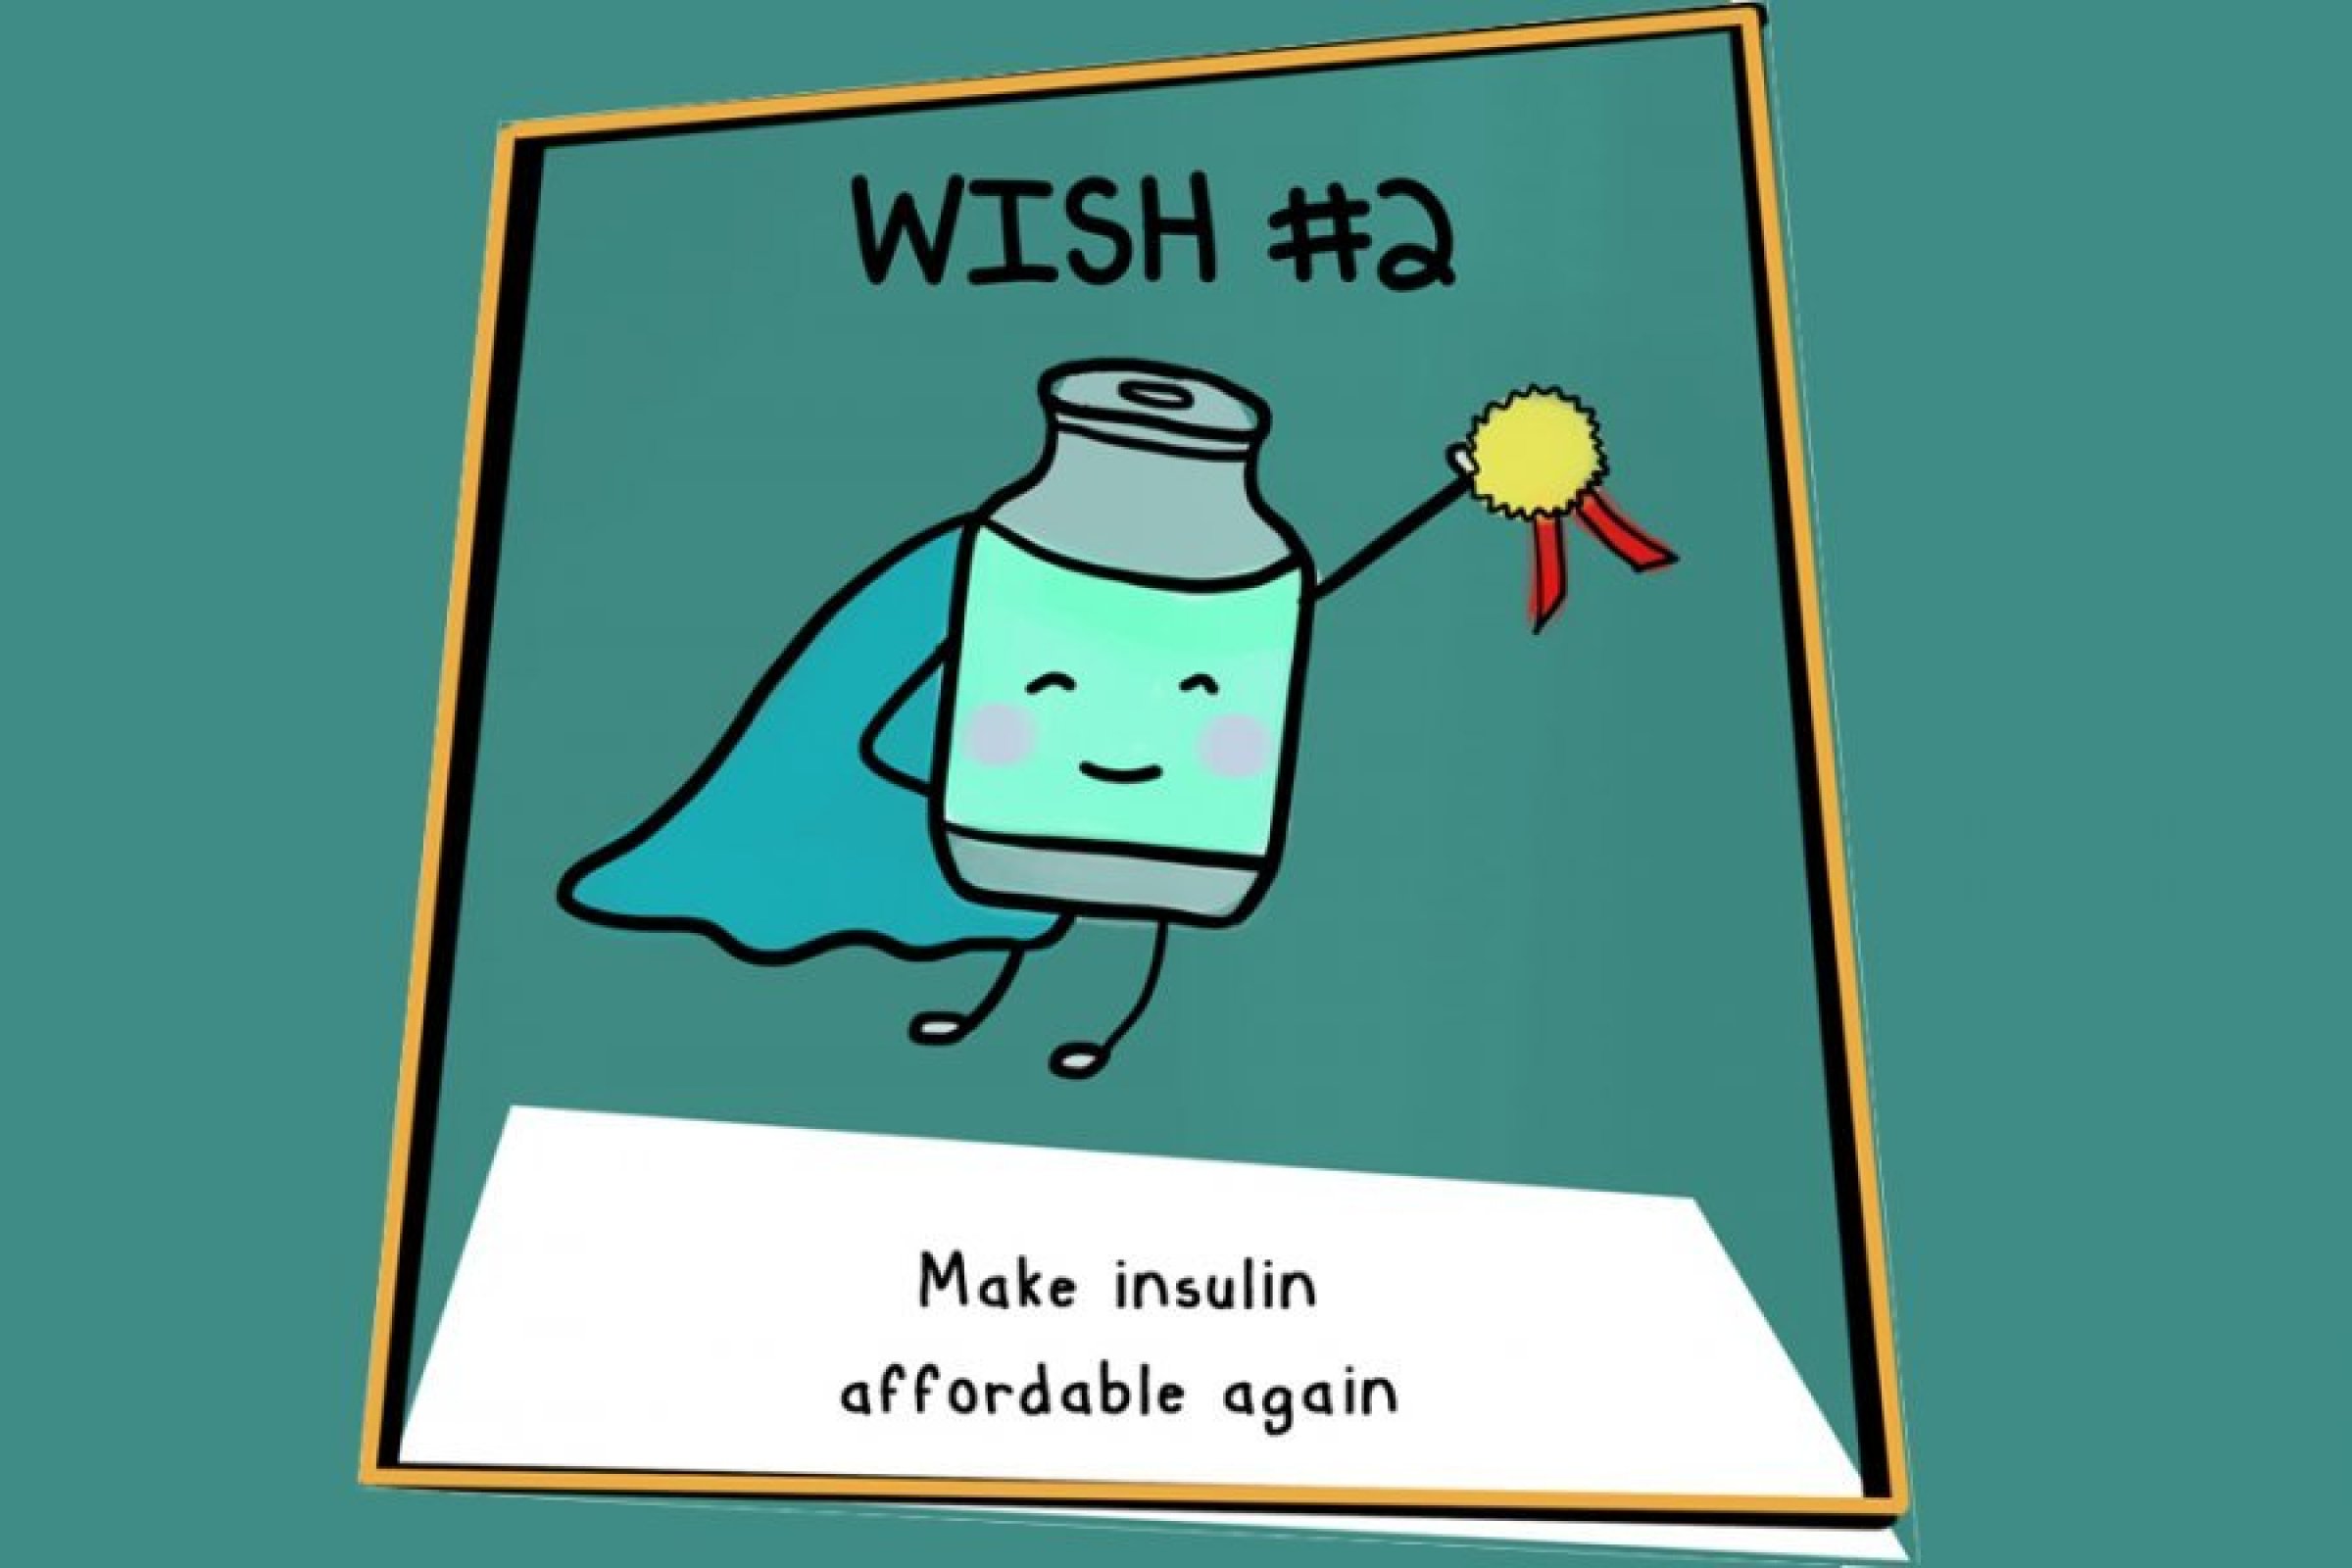 MSF hopes to see other manufacturers offer quality approved insulin at more affordable prices in 2020. Illustrations by Vivian Peng.